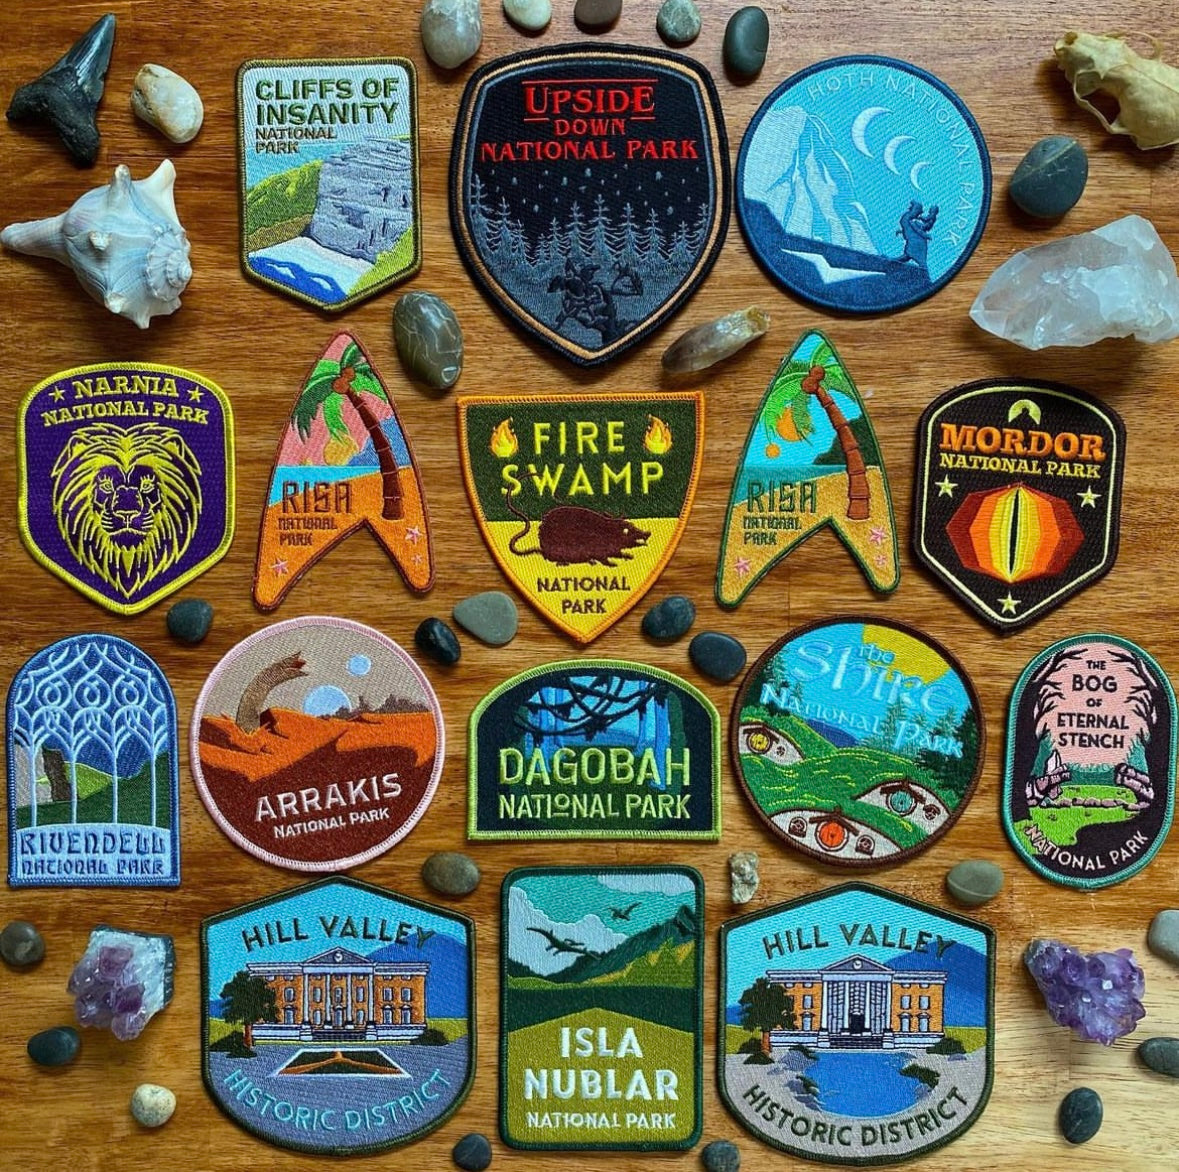 Lake District National Park patch – The Adventure Patch Company